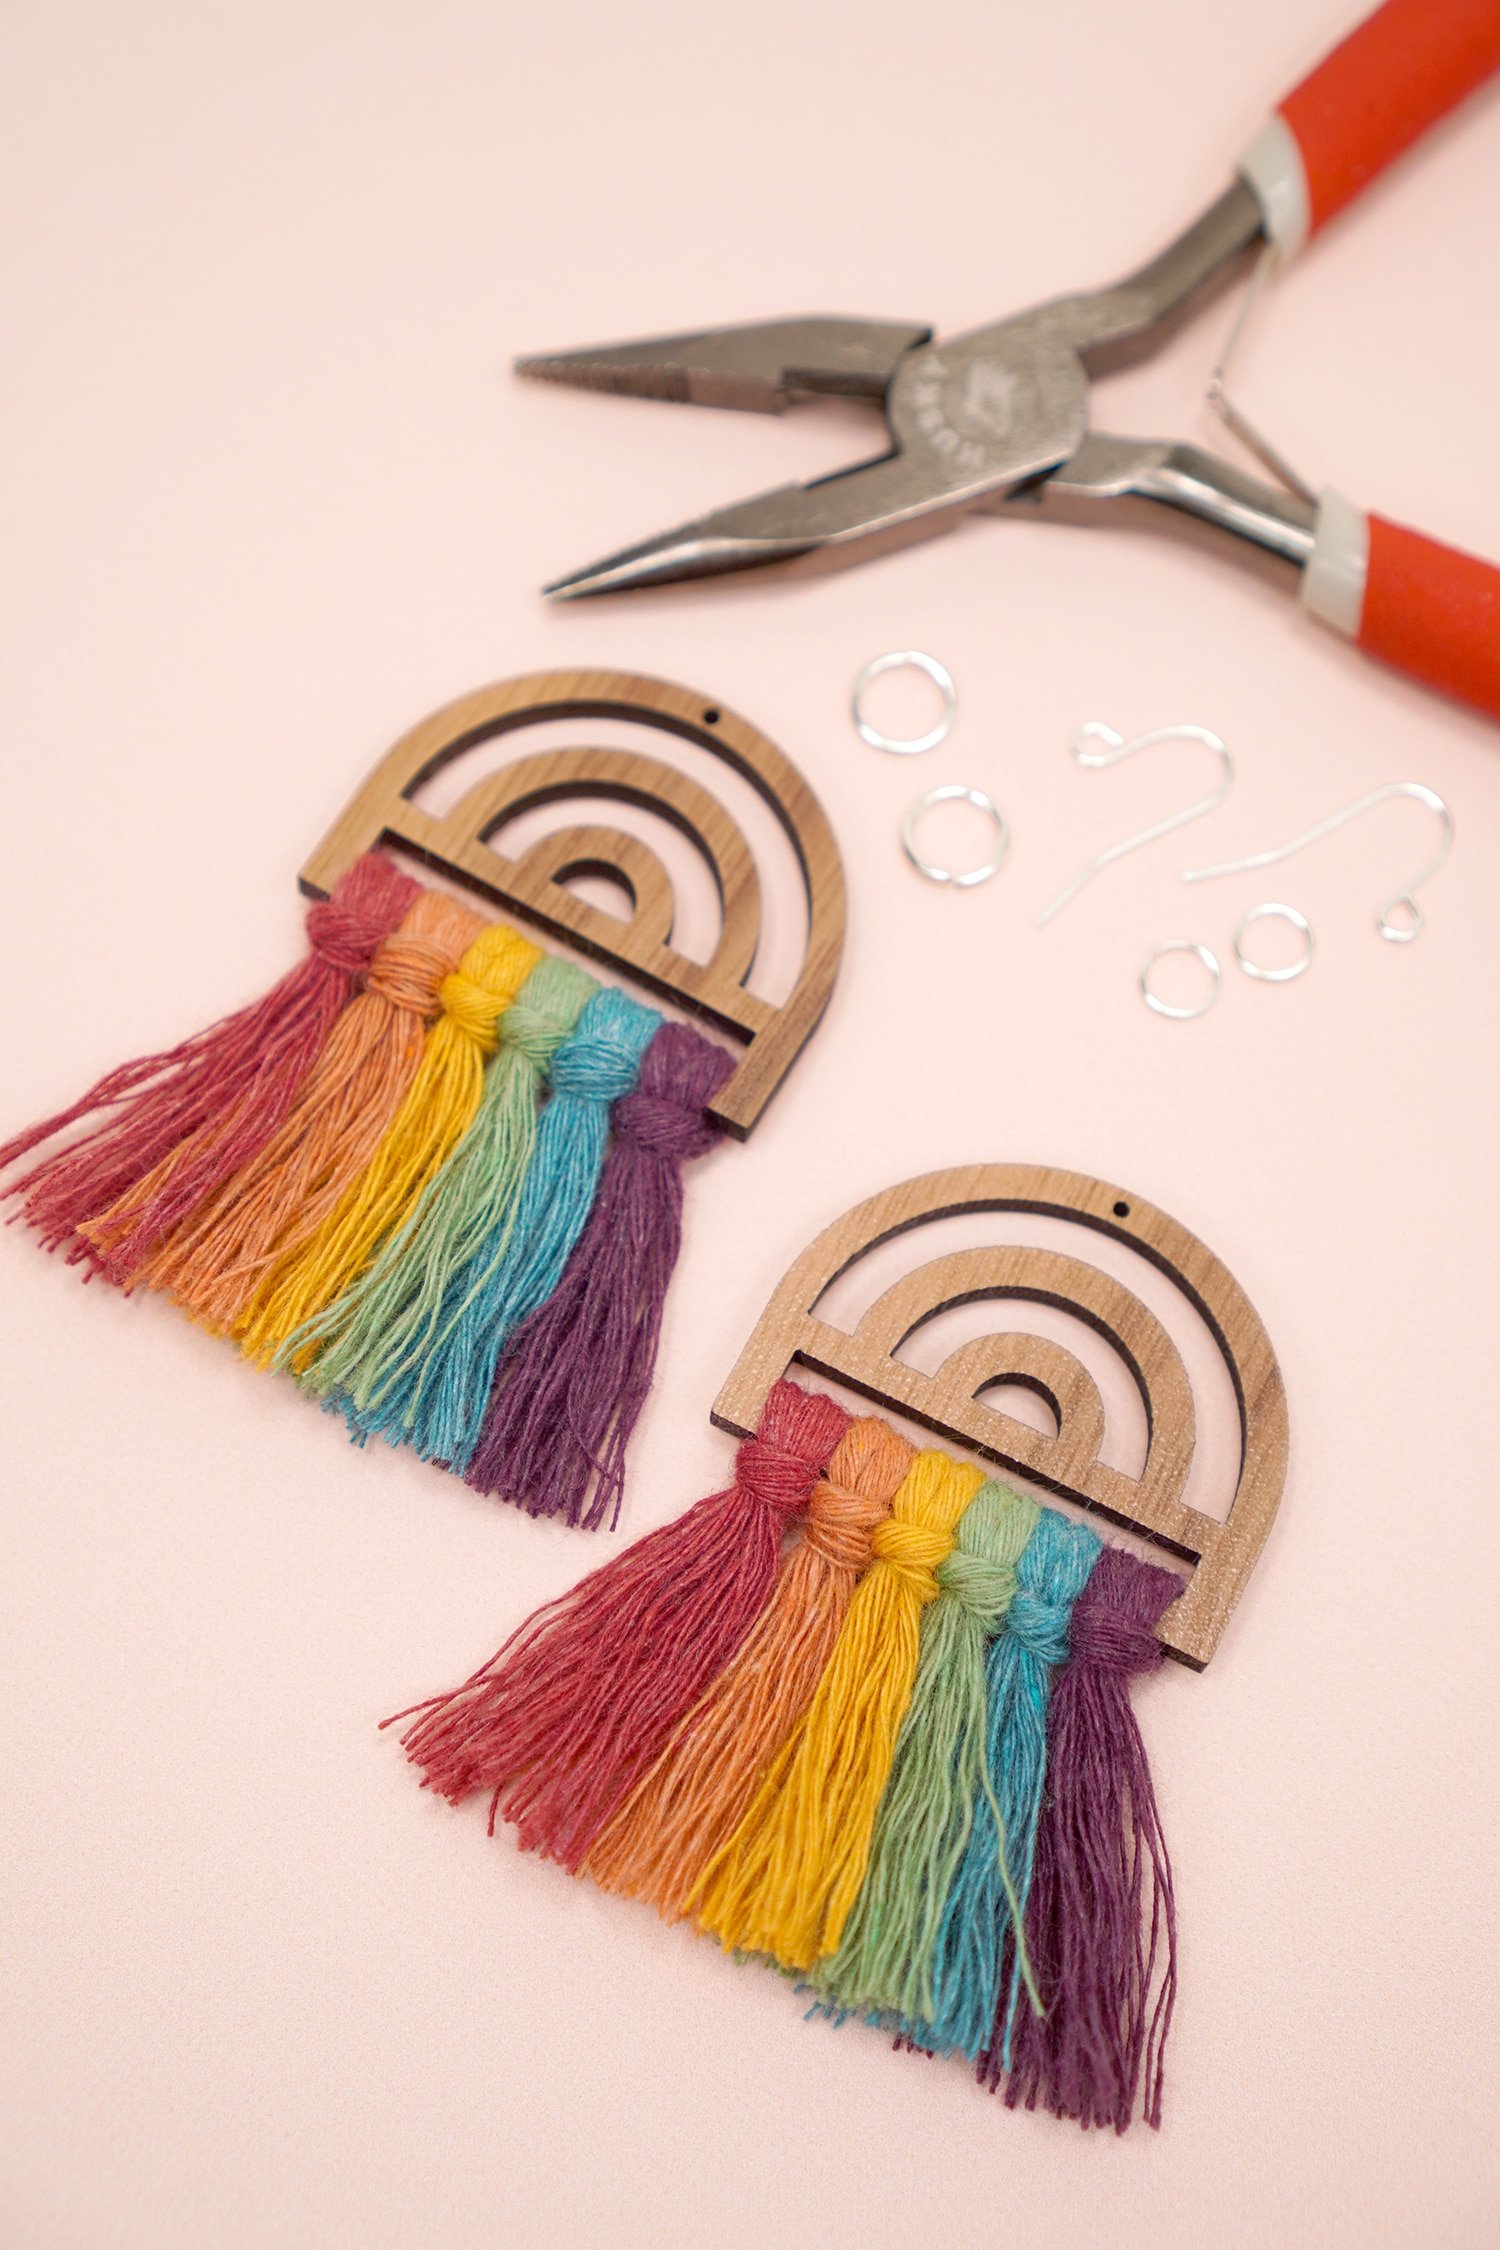 Rainbow macrame frames with earring wires, jump rings, and jewelry pliers in background